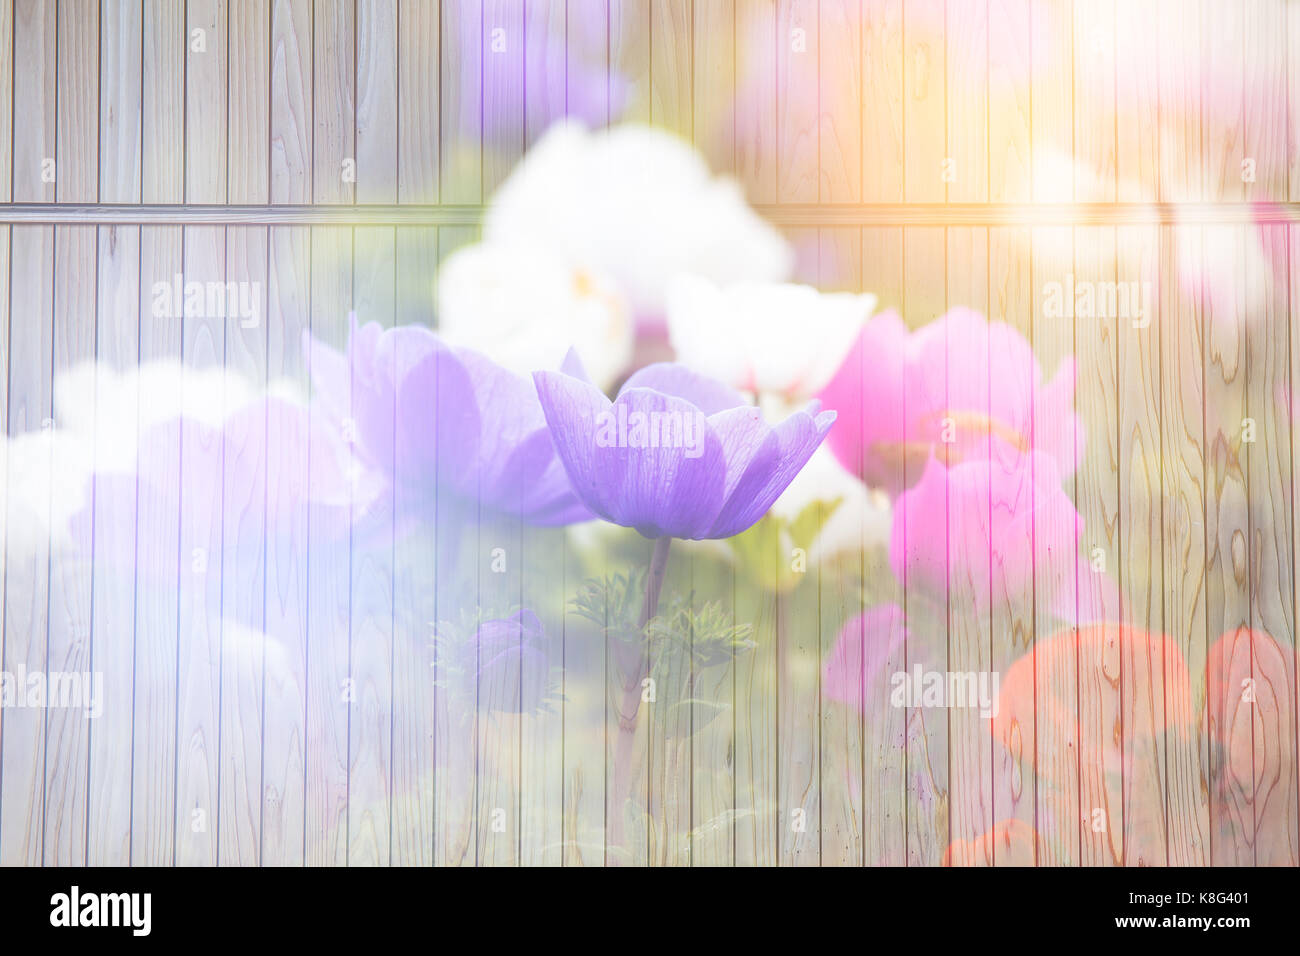 Anemone in garden with sunlight background on wood texture. Stock Photo